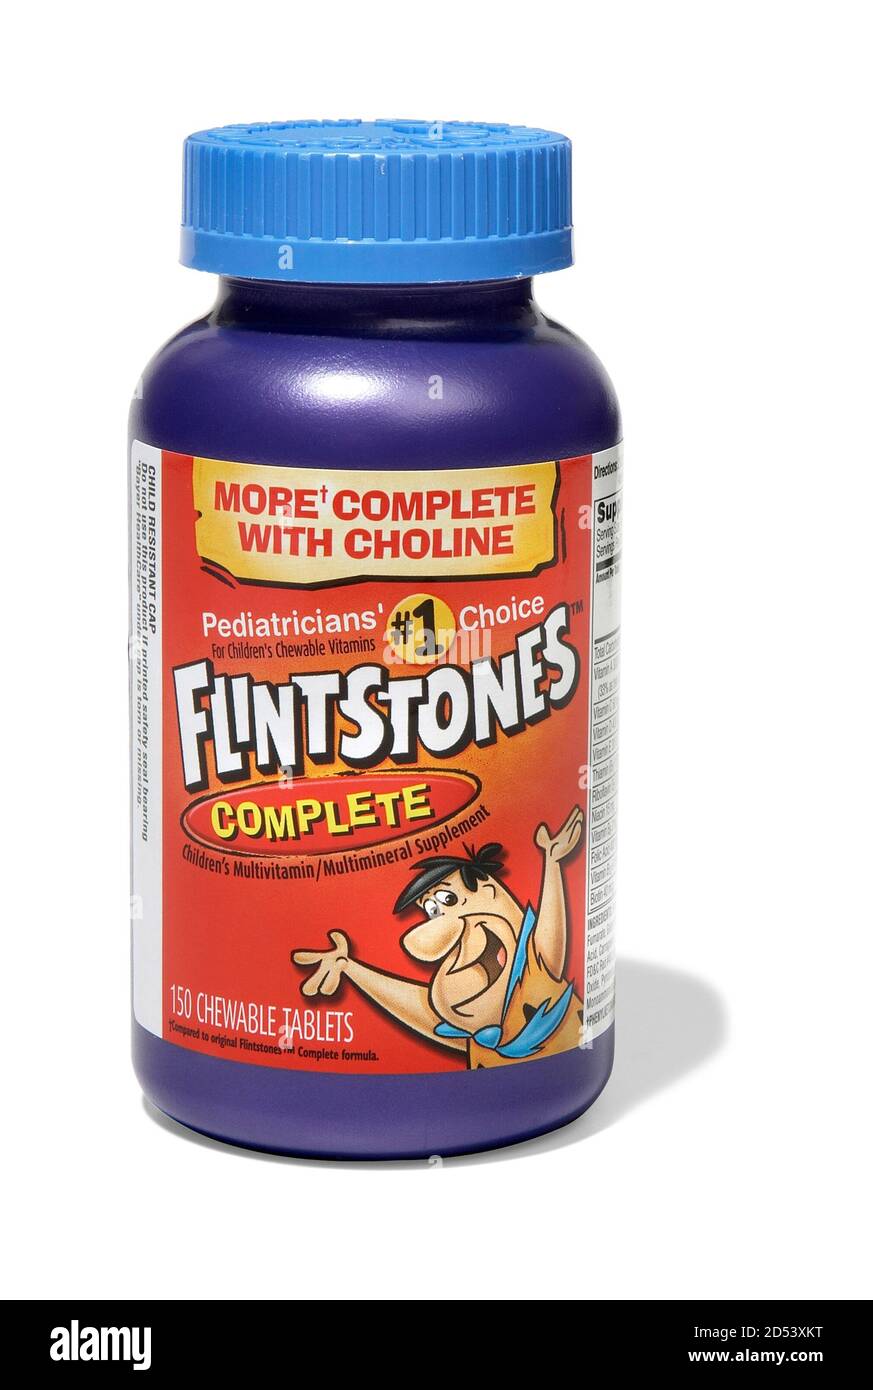 flintstones complete children's vitamins photographed on a white background Stock Photo